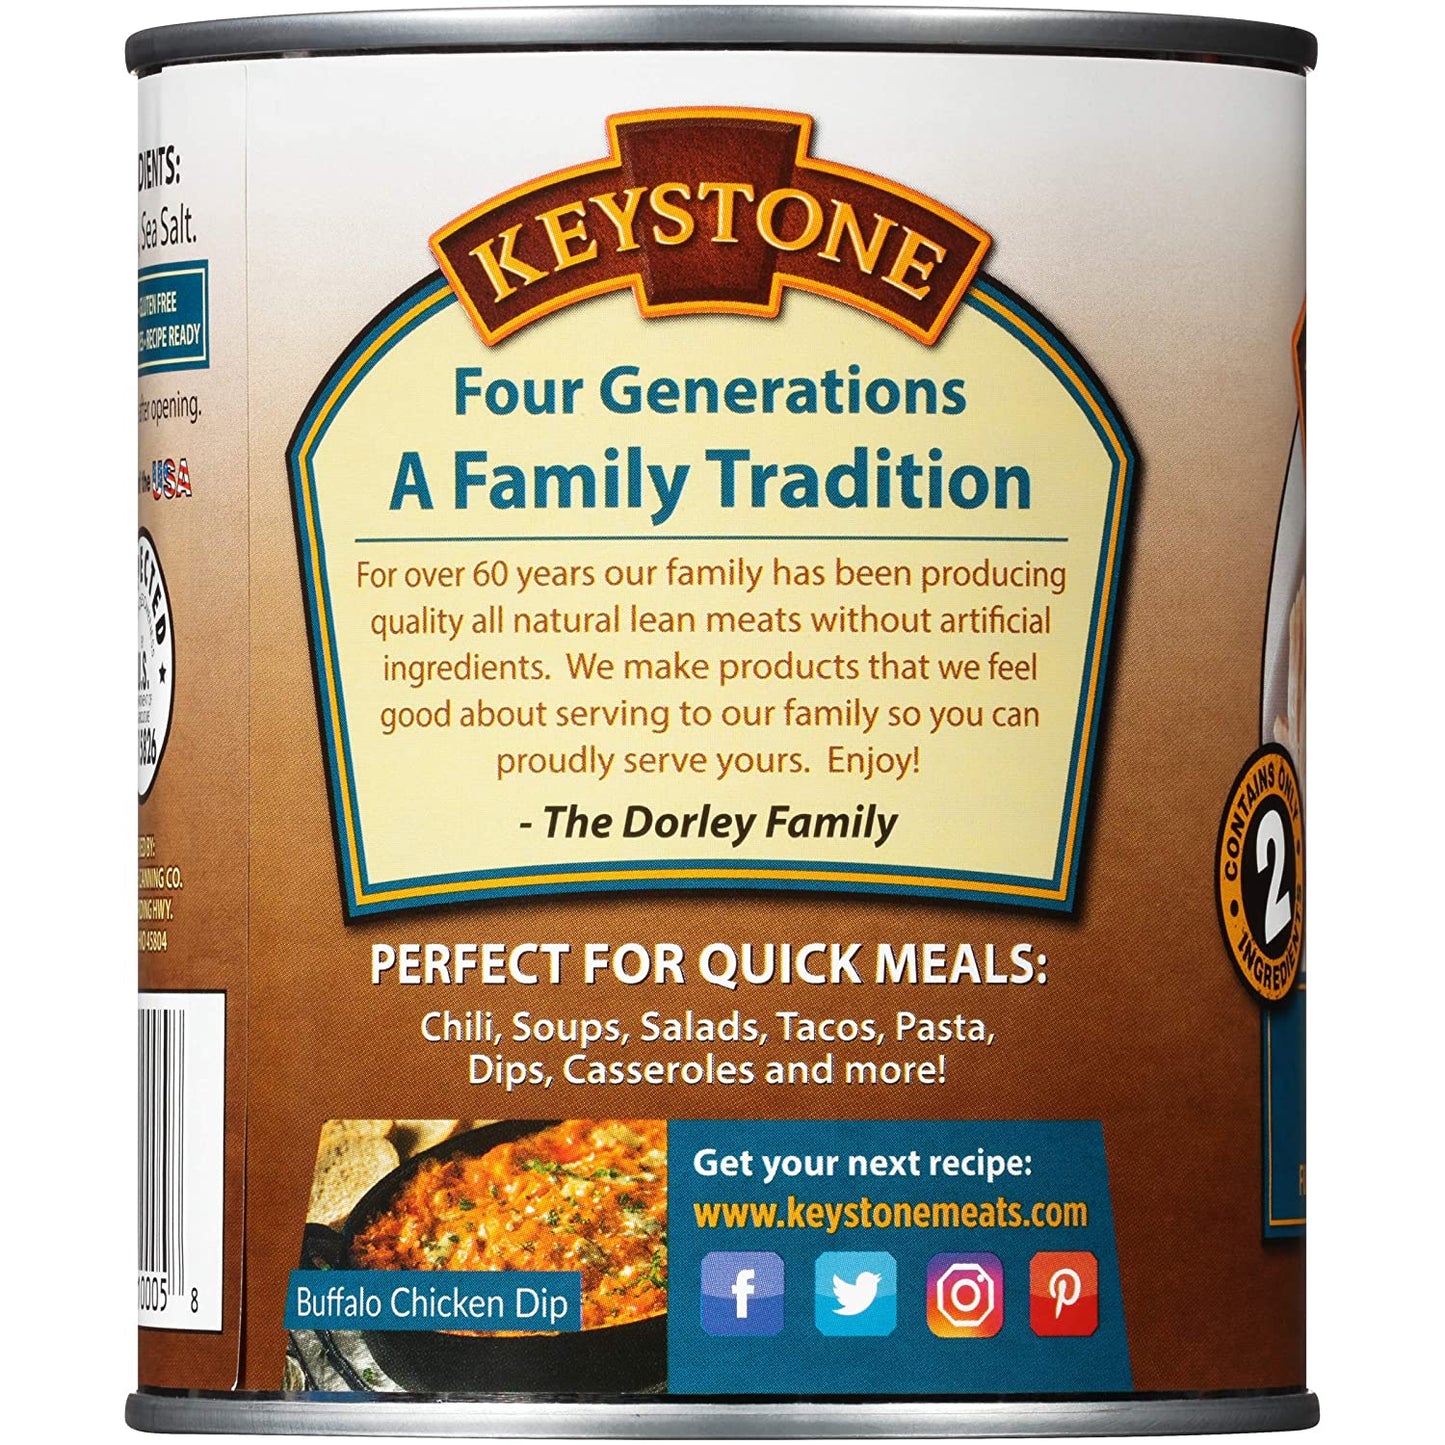 Keystone Meats All Natural Canned Chicken, 28 Ounce